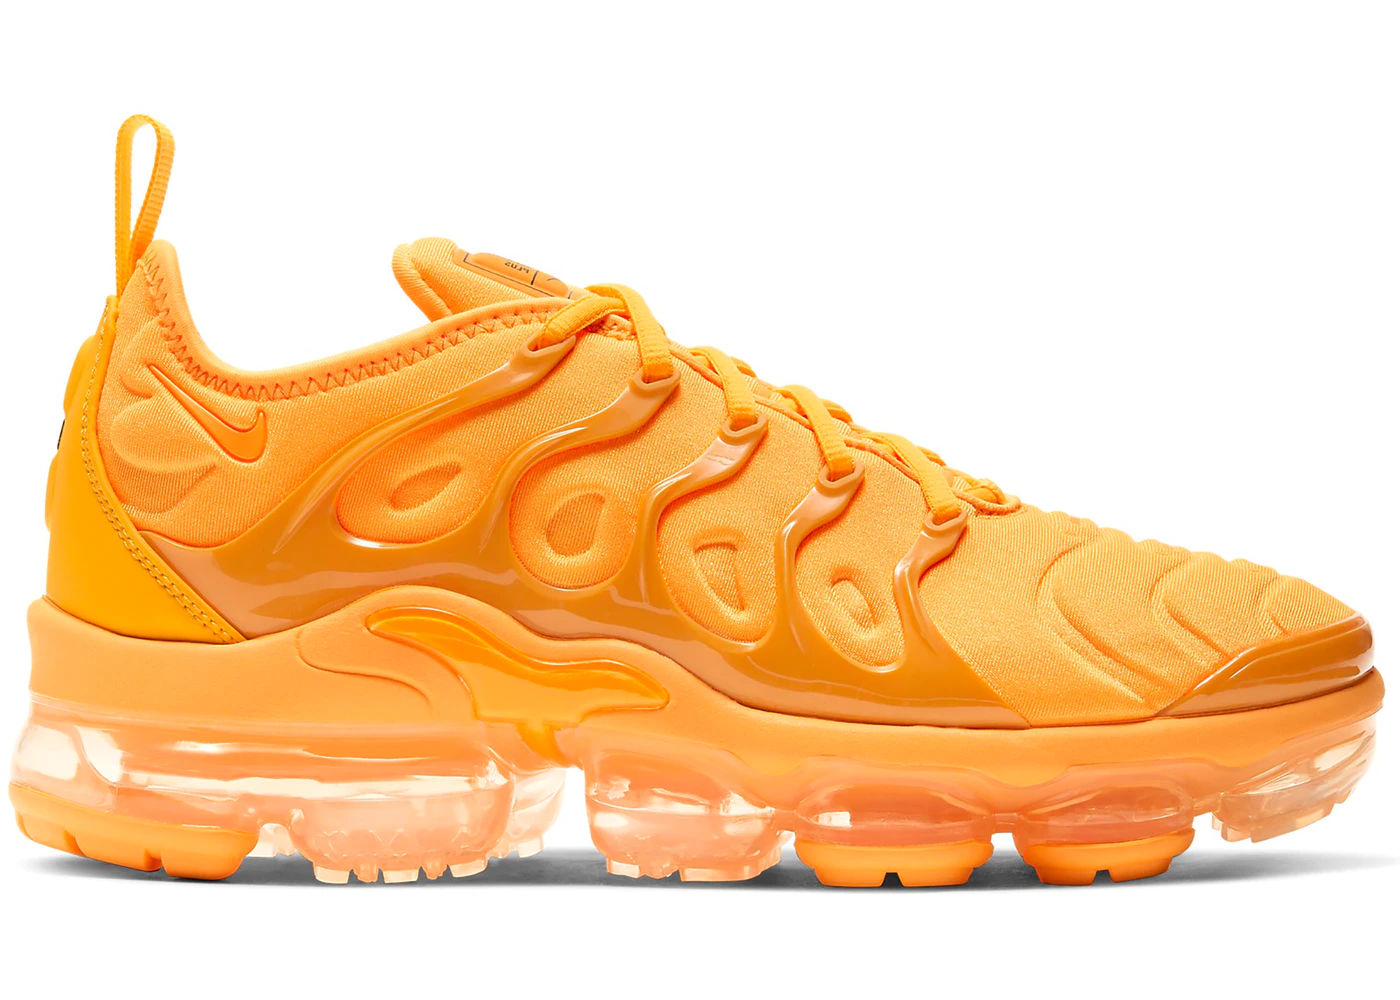 Nike Air Vapormax Plus Women's Orange Outlet Online, Up to 69% OFF